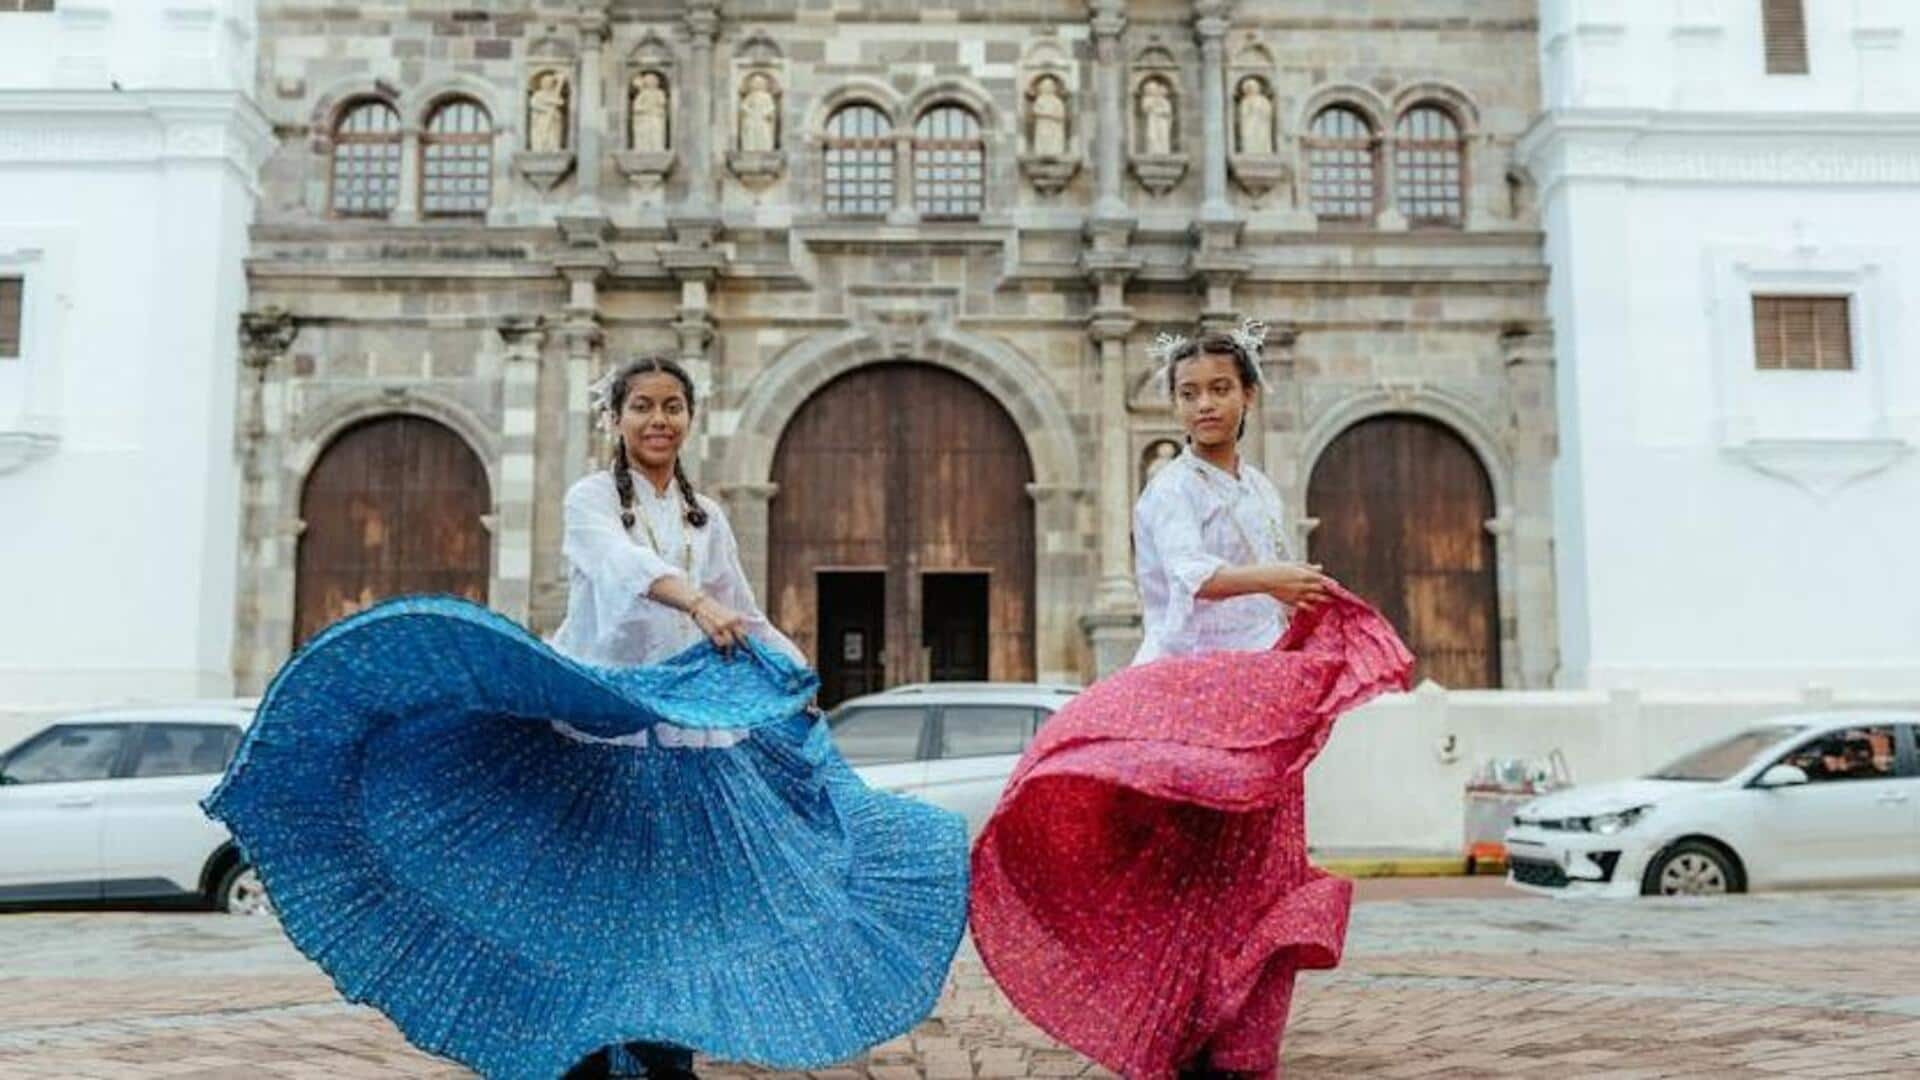 Delve into Seville's flamenco fashion with these tips